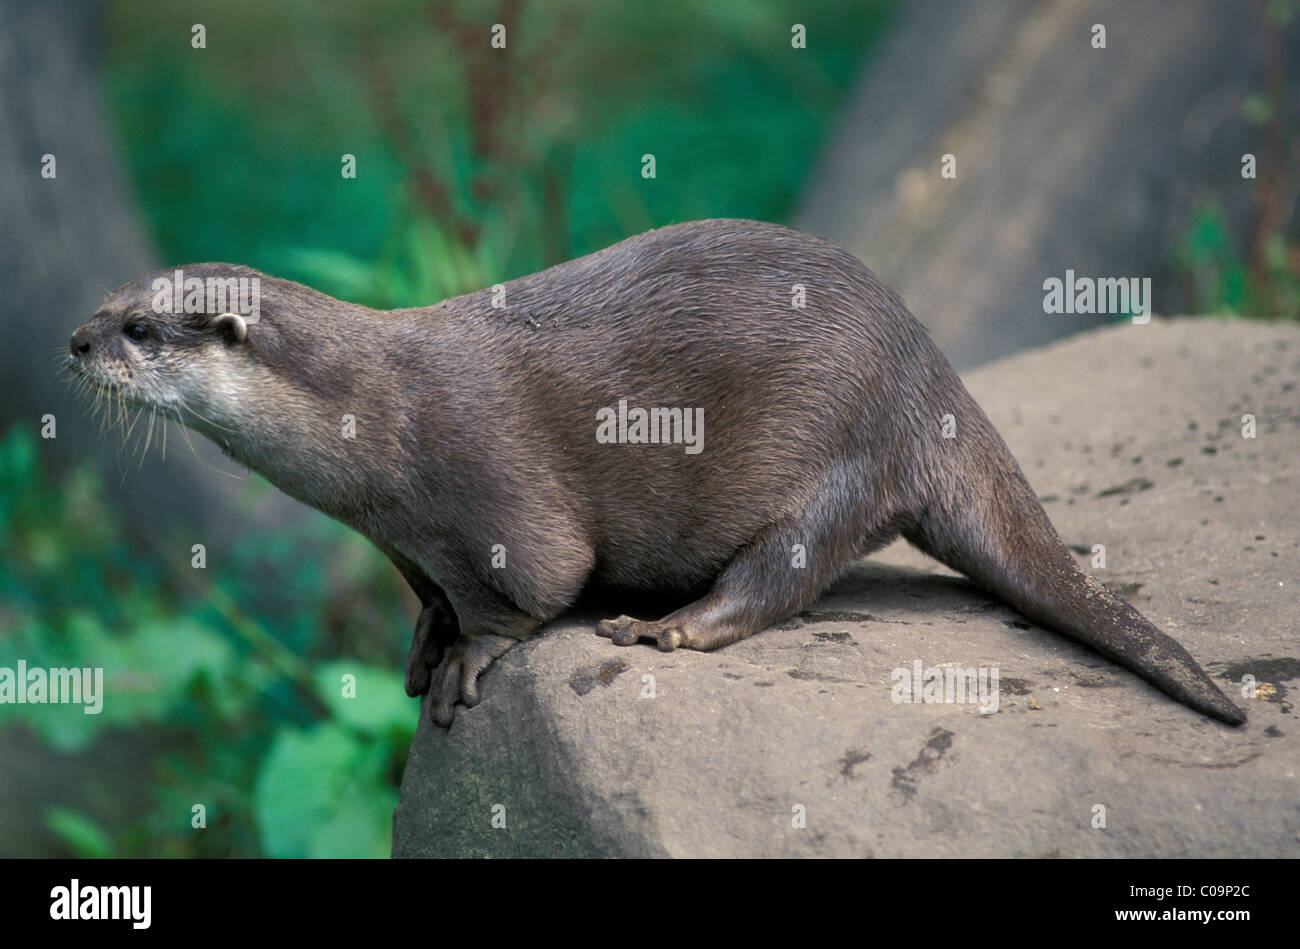 Oriental Small-clawed Otter or Asian Small-clawed Otter (Aonyx cinerea), Southeast Asian habitat Stock Photo